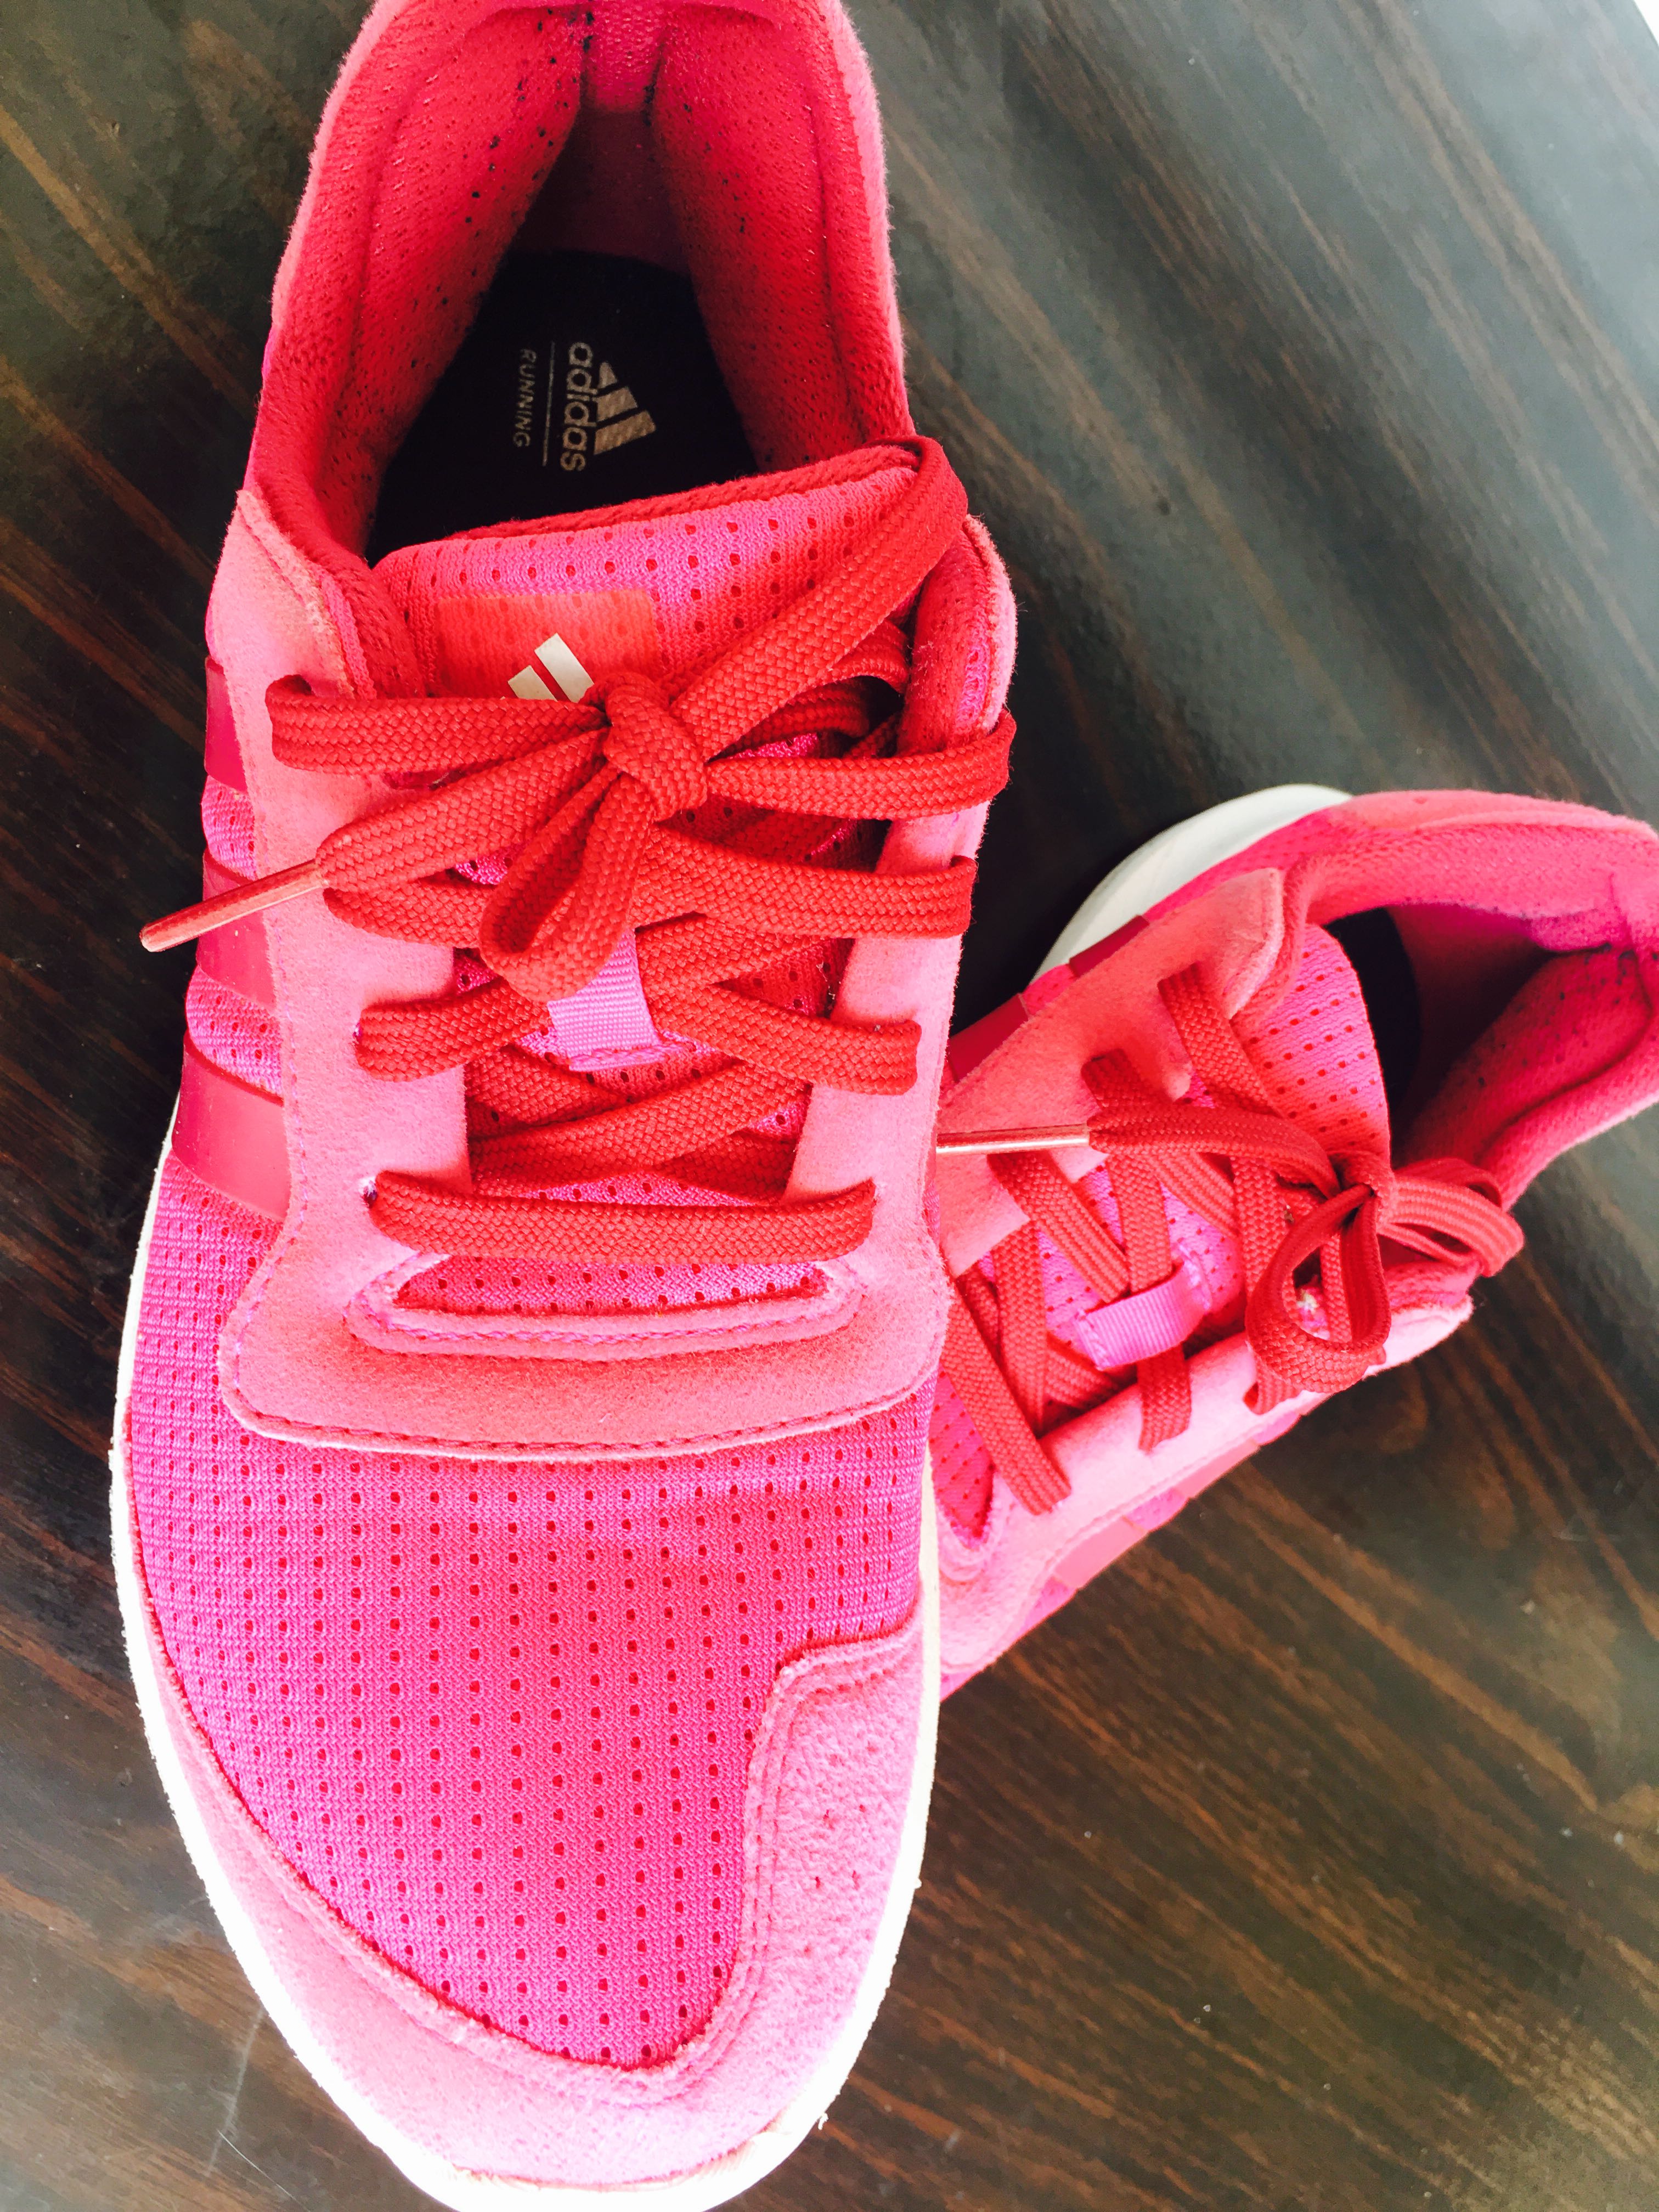 adidas shoes pink womens